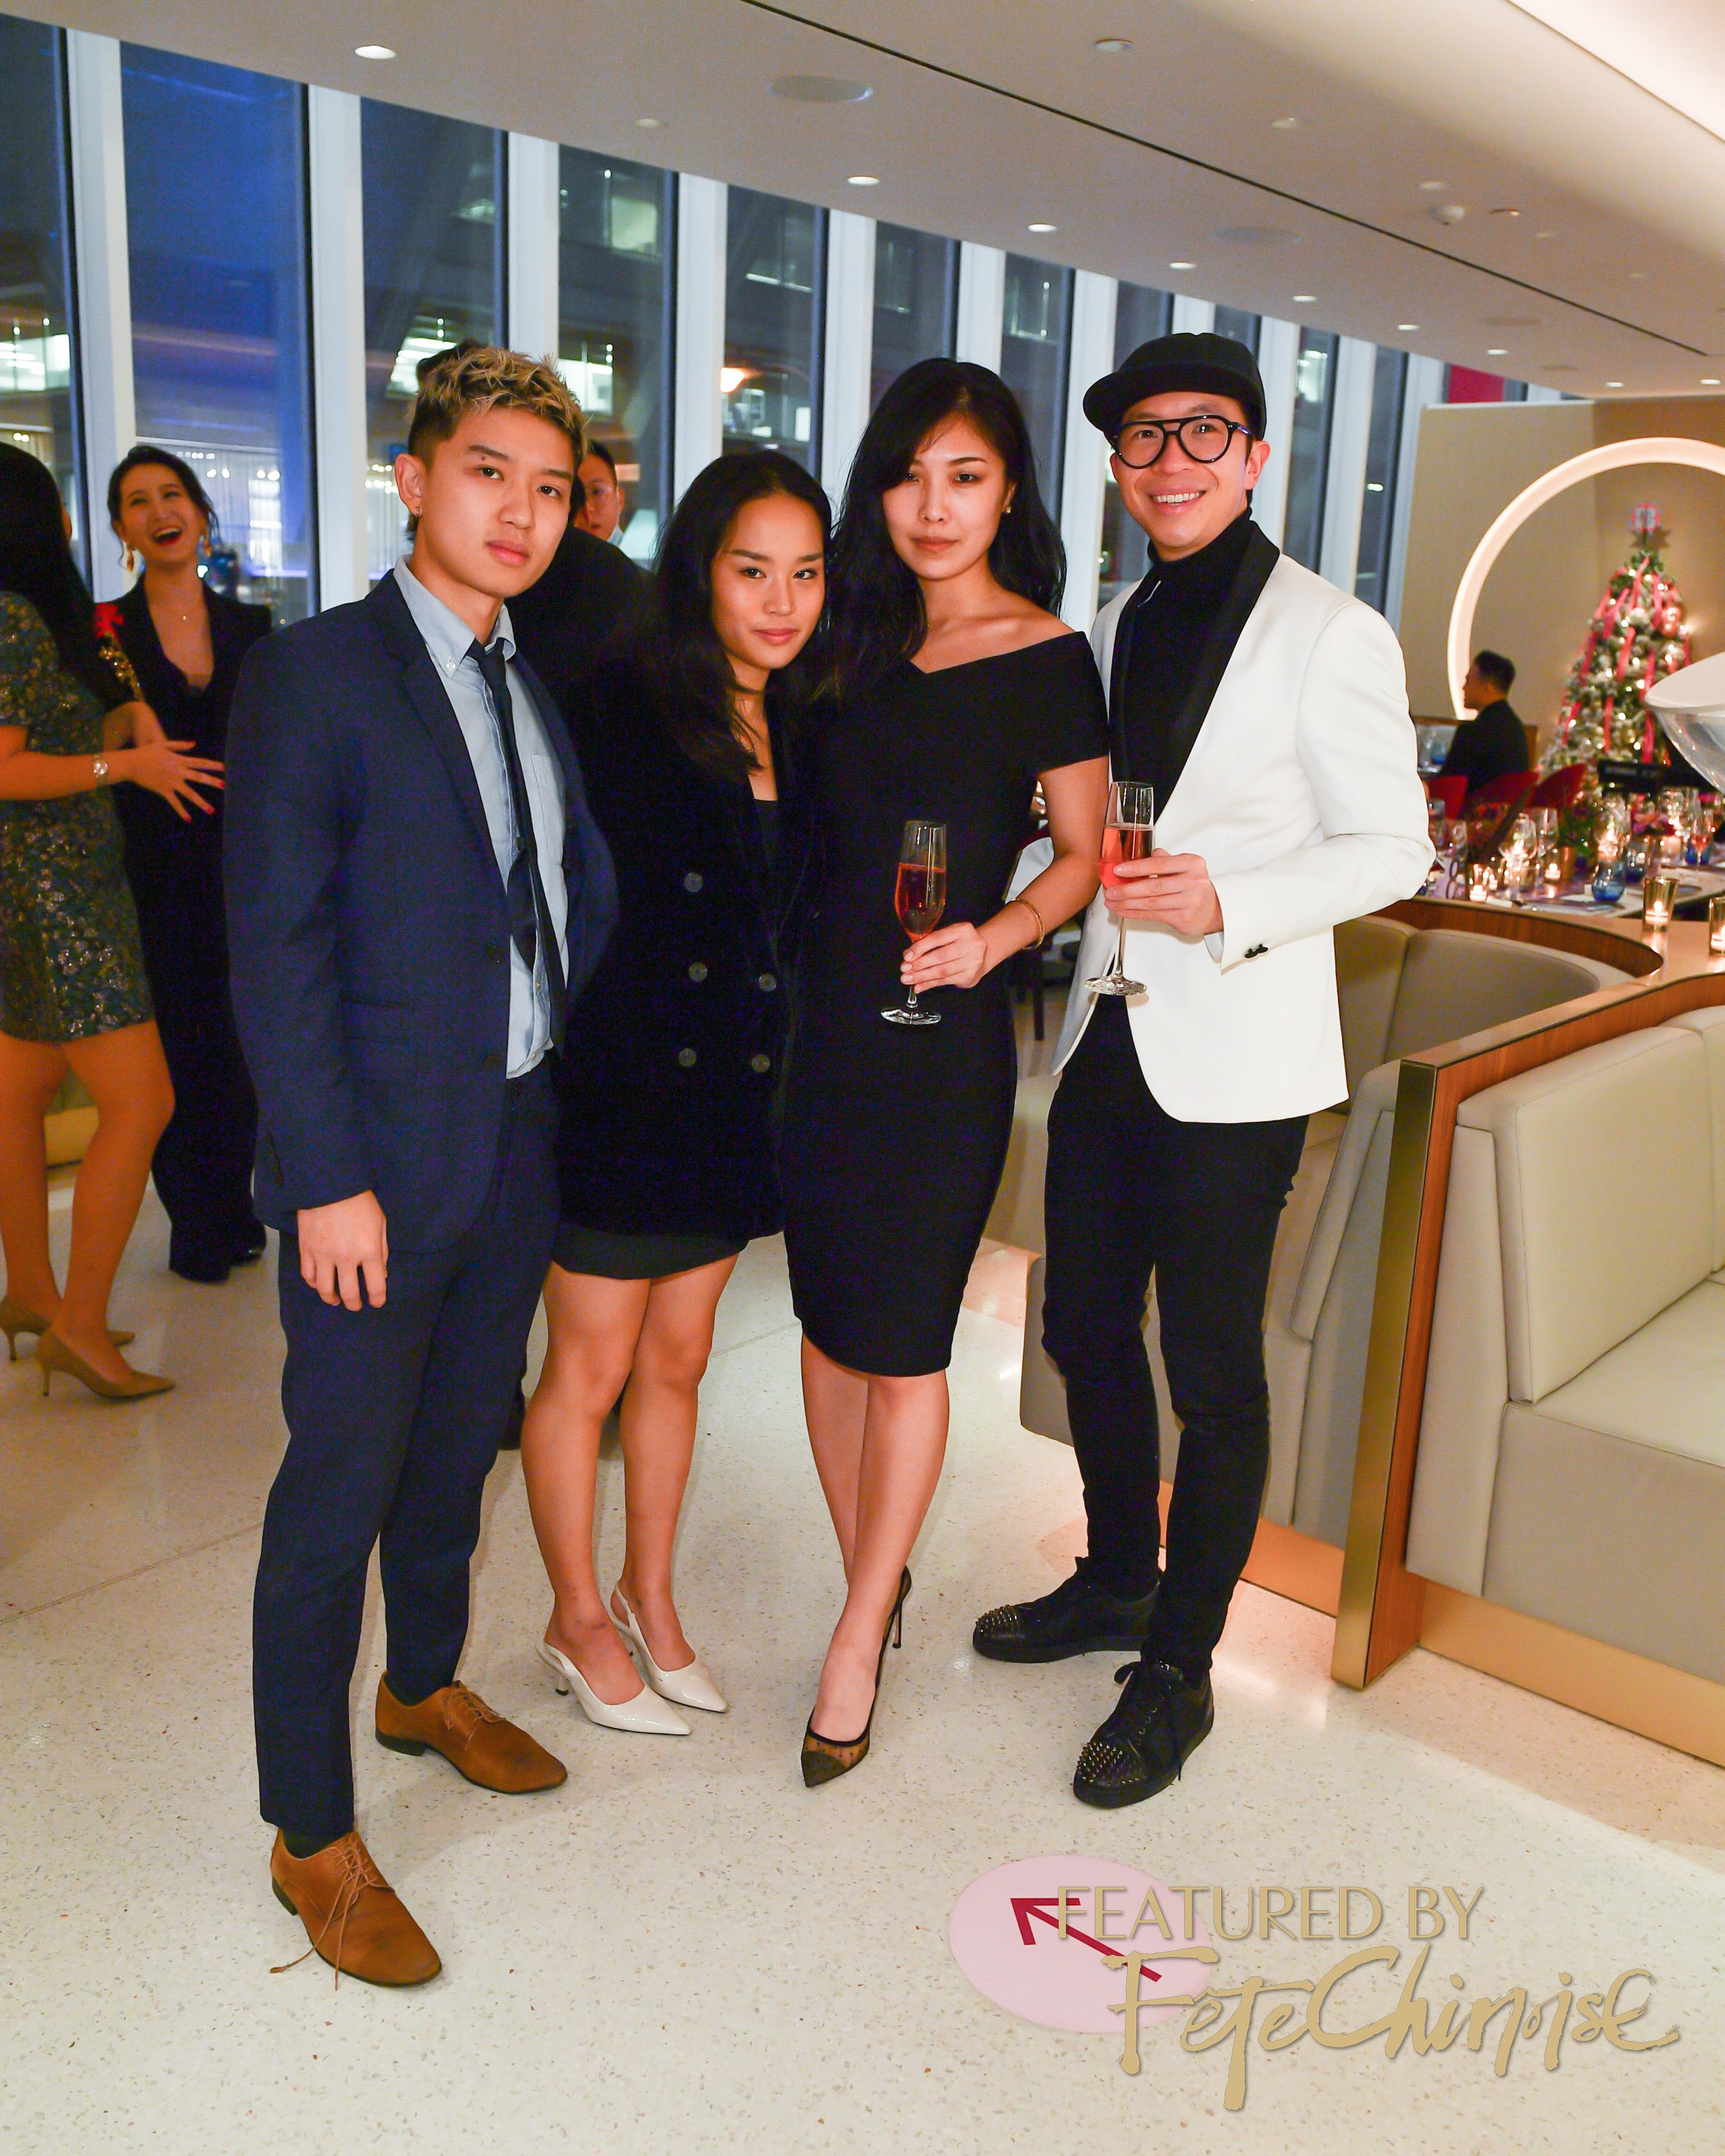 Fete-Chionise-Magaine-edition7-launch-party-holt-renfrew-photography-release-114.jpg